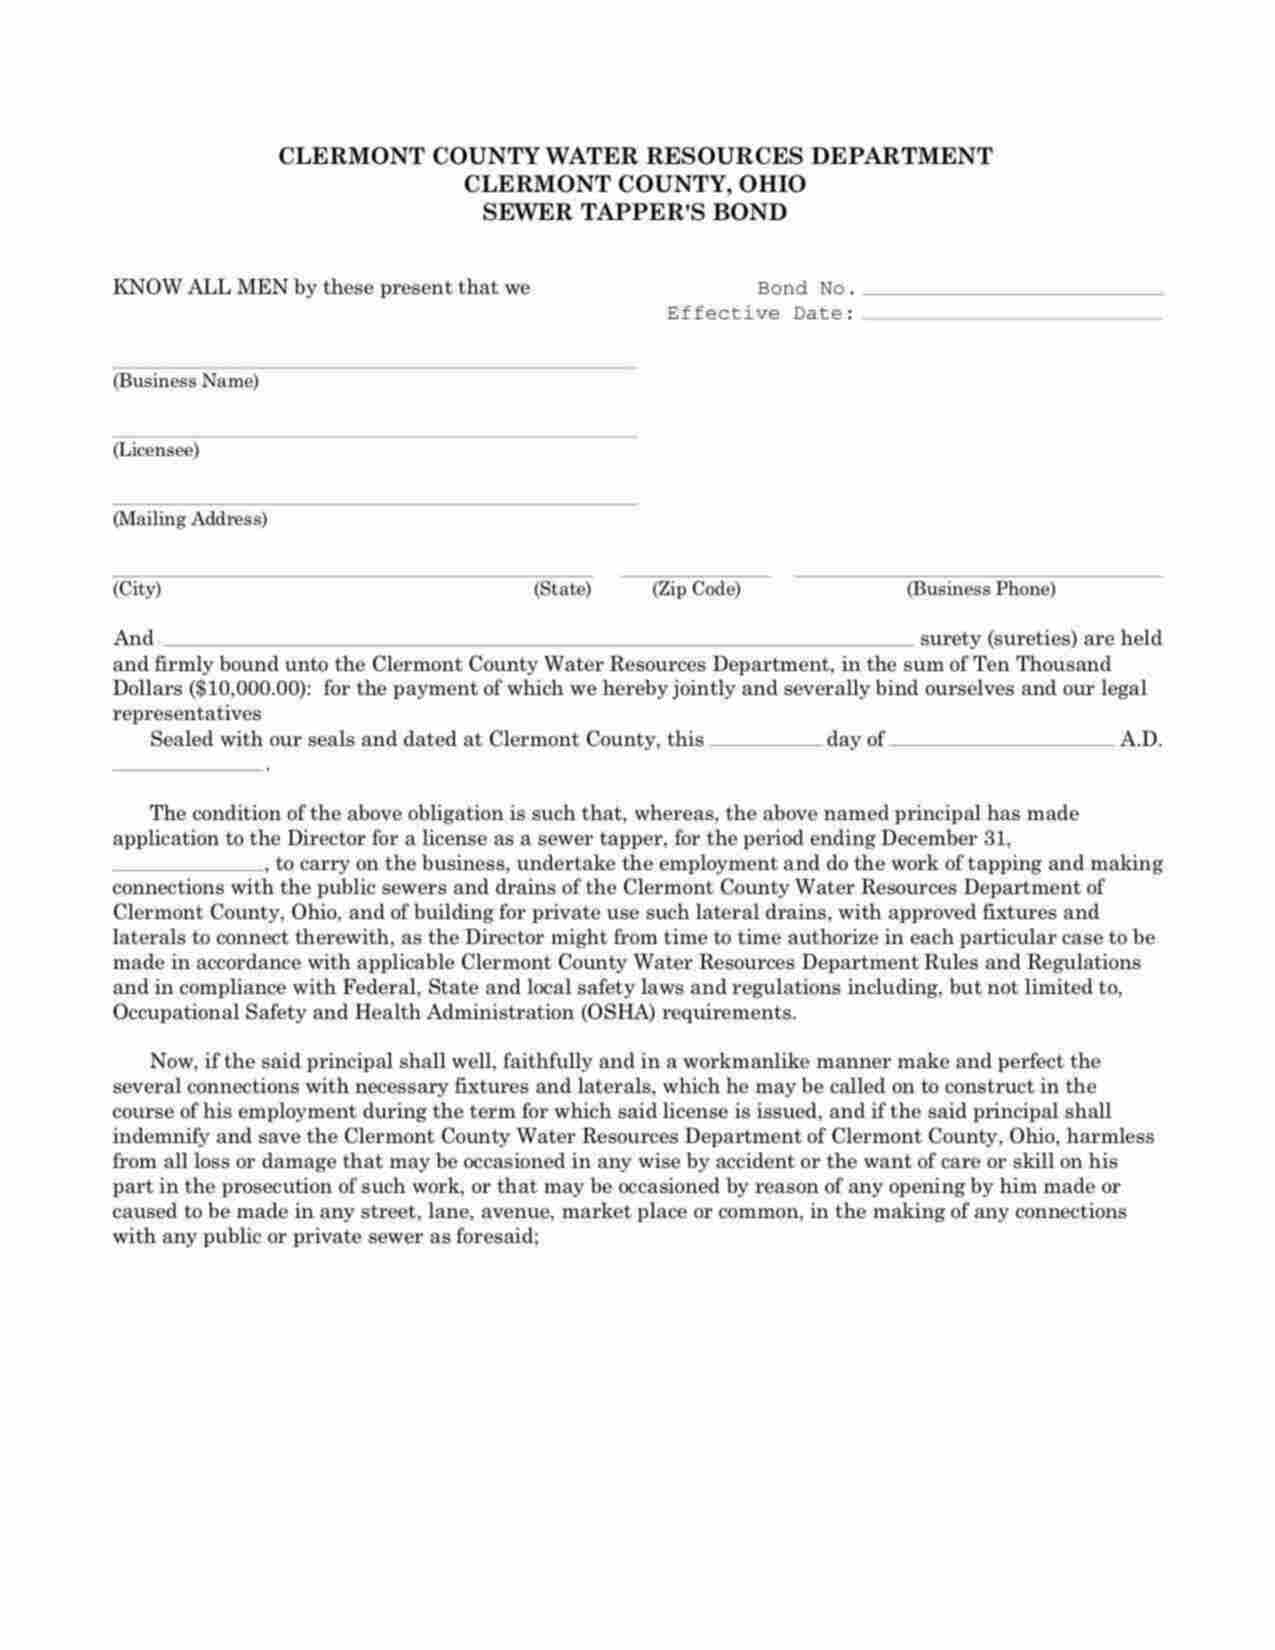 Ohio Sewer Tapper (Water Resources Dept) Bond Form